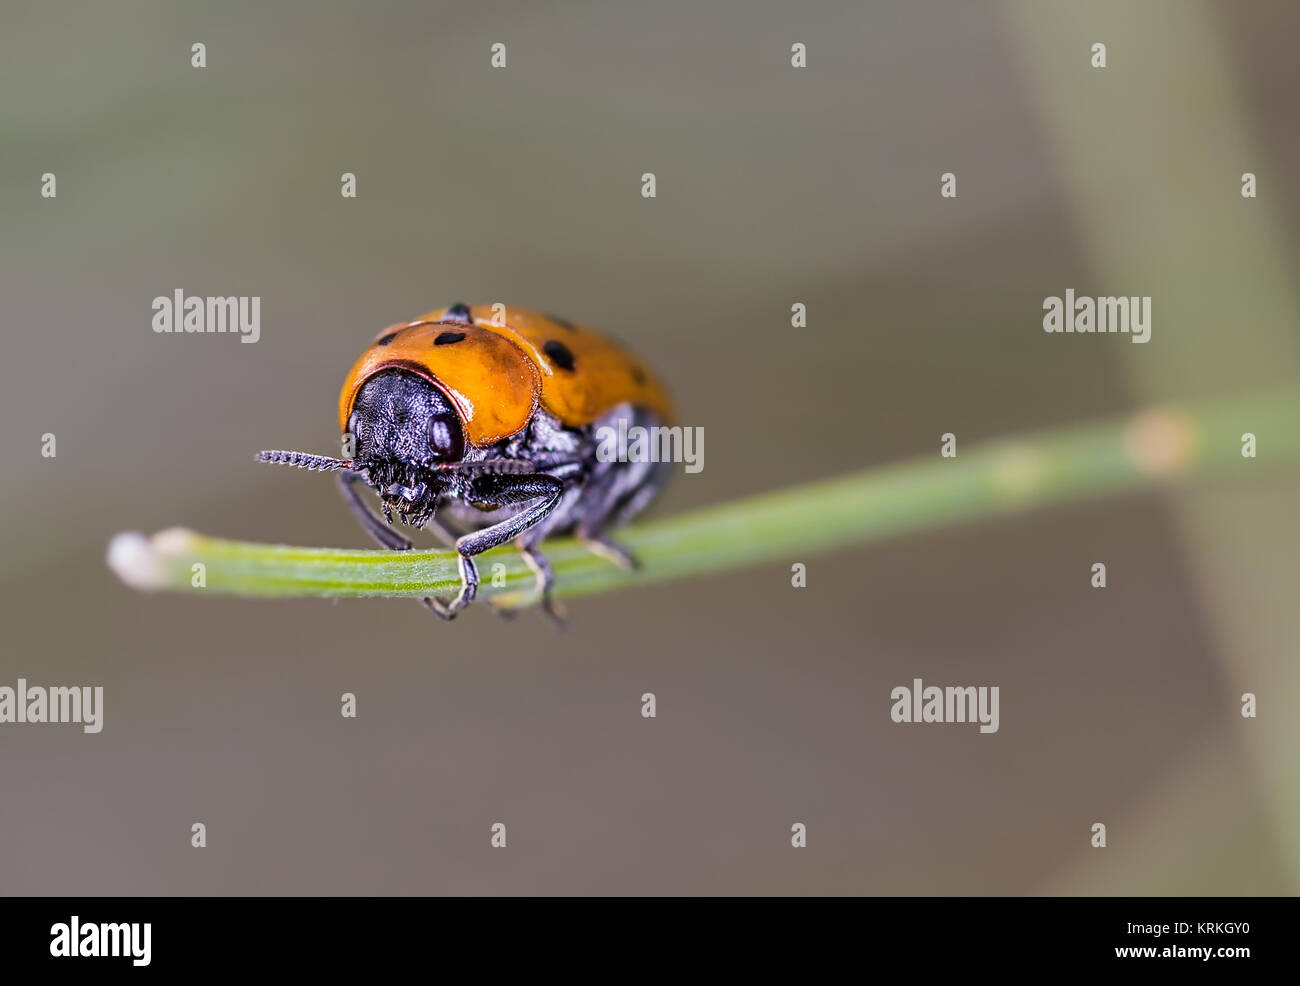 Beetle front view, photographed in their natural environment. Stock Photo